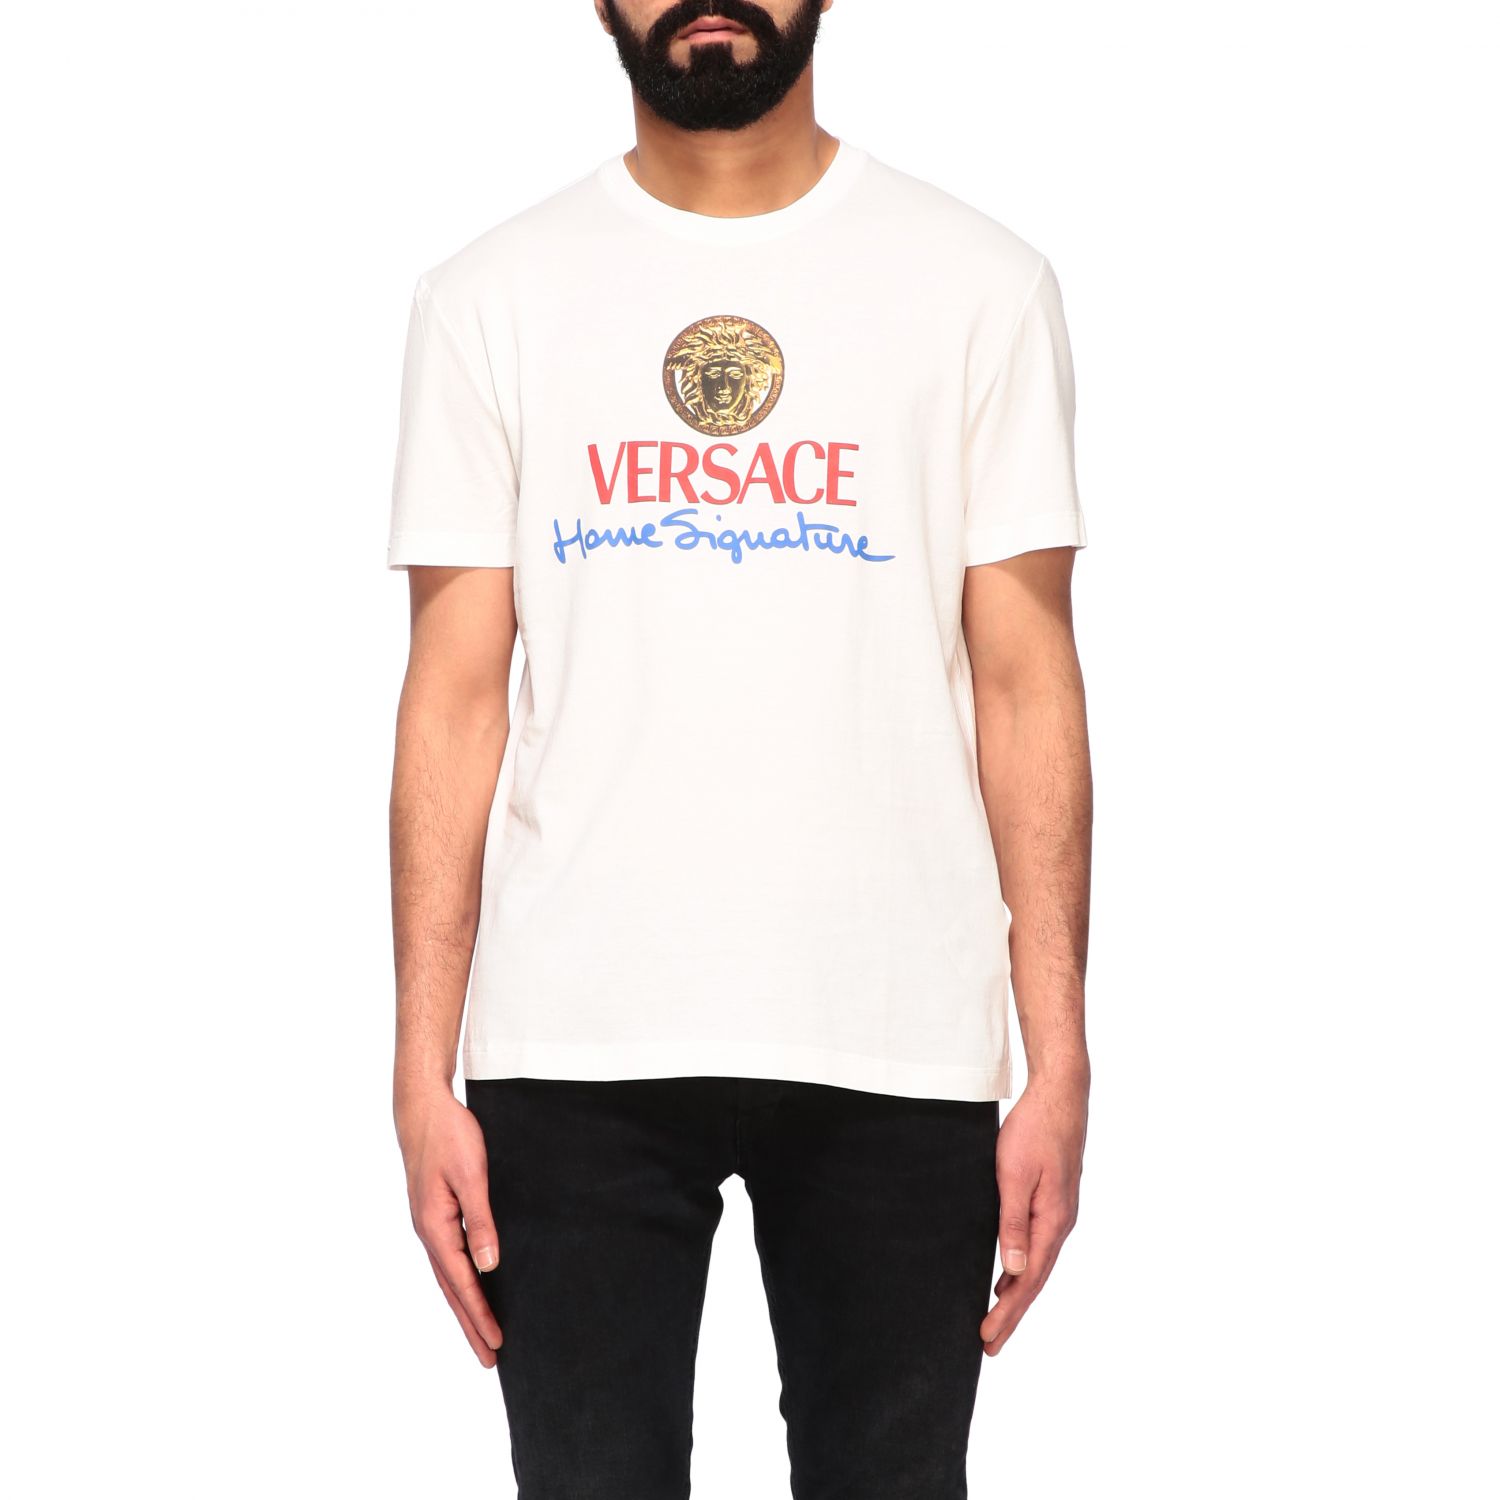 Versace Outlet: crew neck t-shirt with logo - White | Versace t-shirt ...